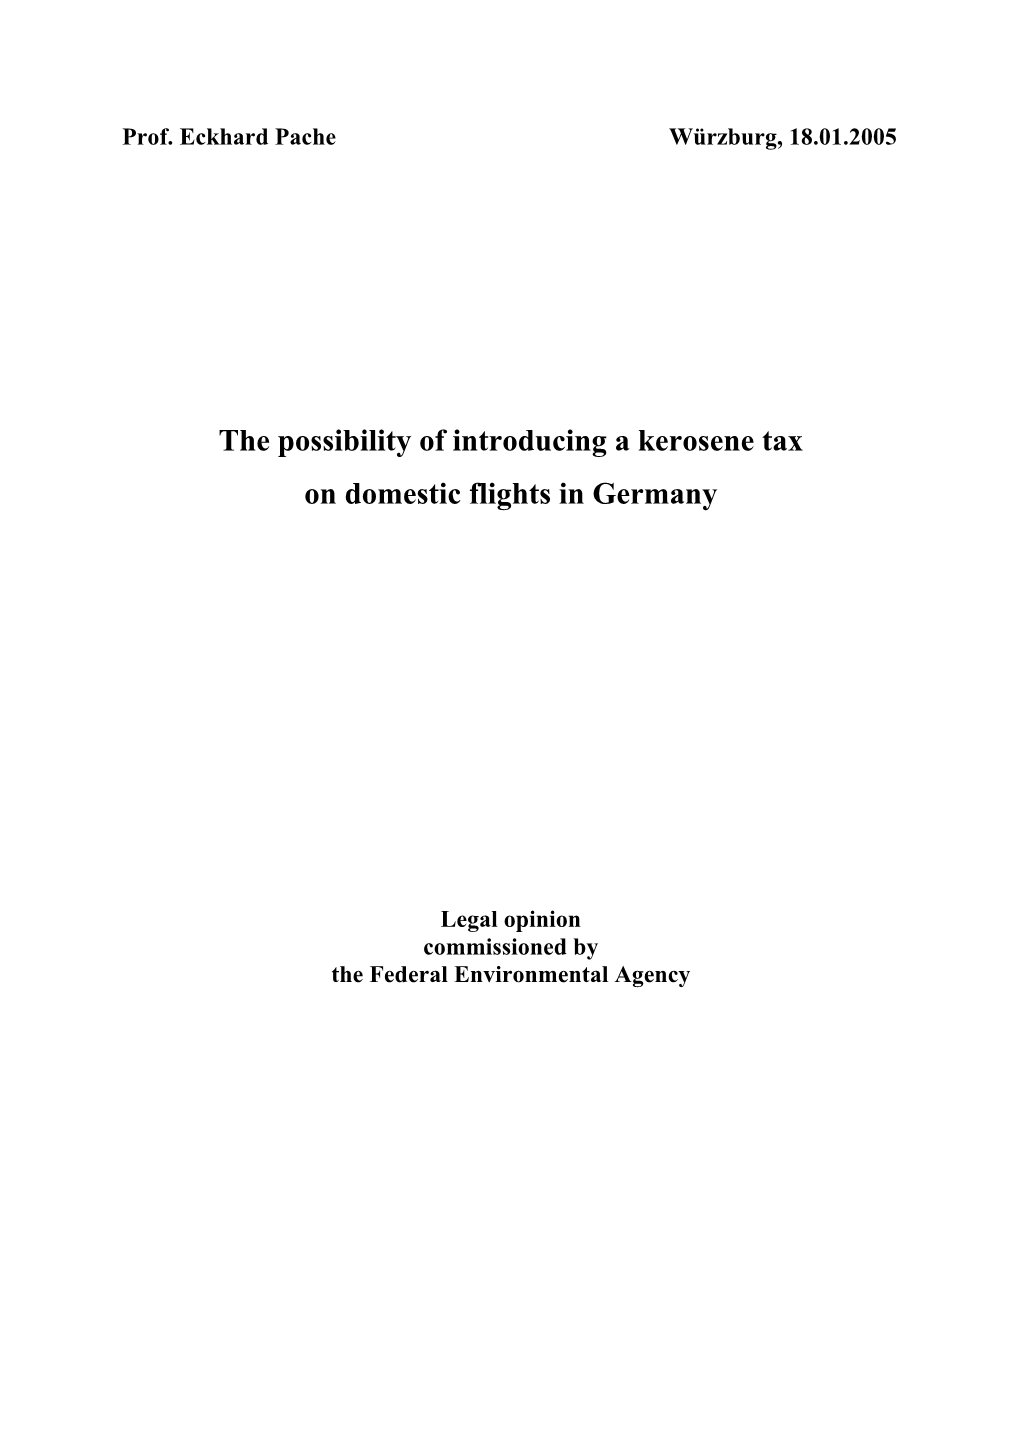 The Possibility of Introducing a Kerosene Tax on Domestic Flights in Germany